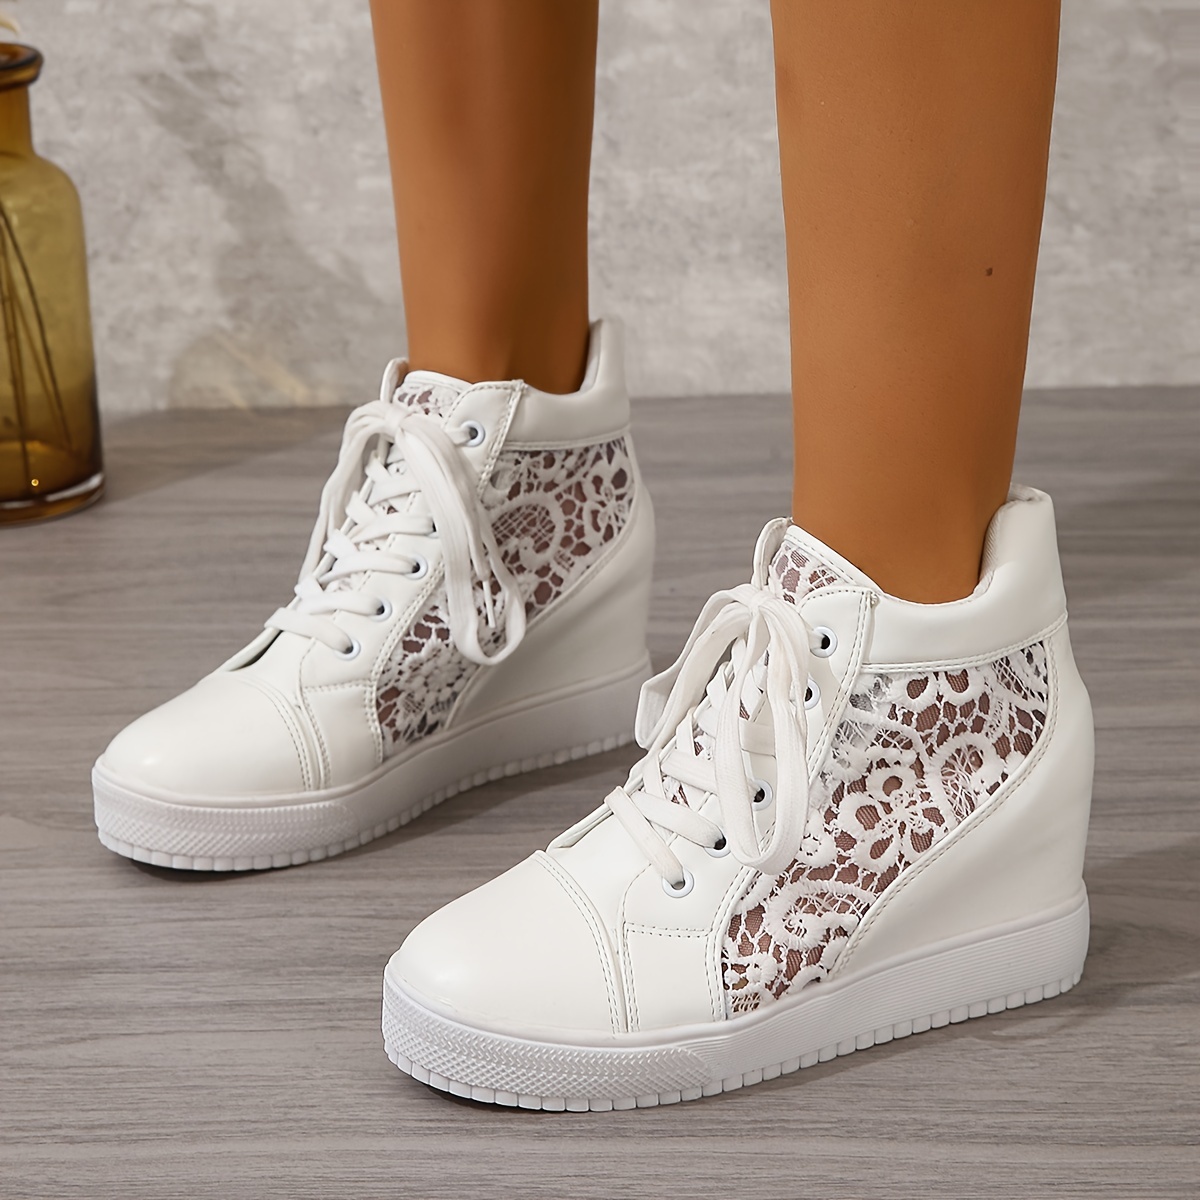 

Women's Wedge Shoes For Height Increase And Casual Wear, Women's Cut-out Lace Sneakers With Floral Embellishments.